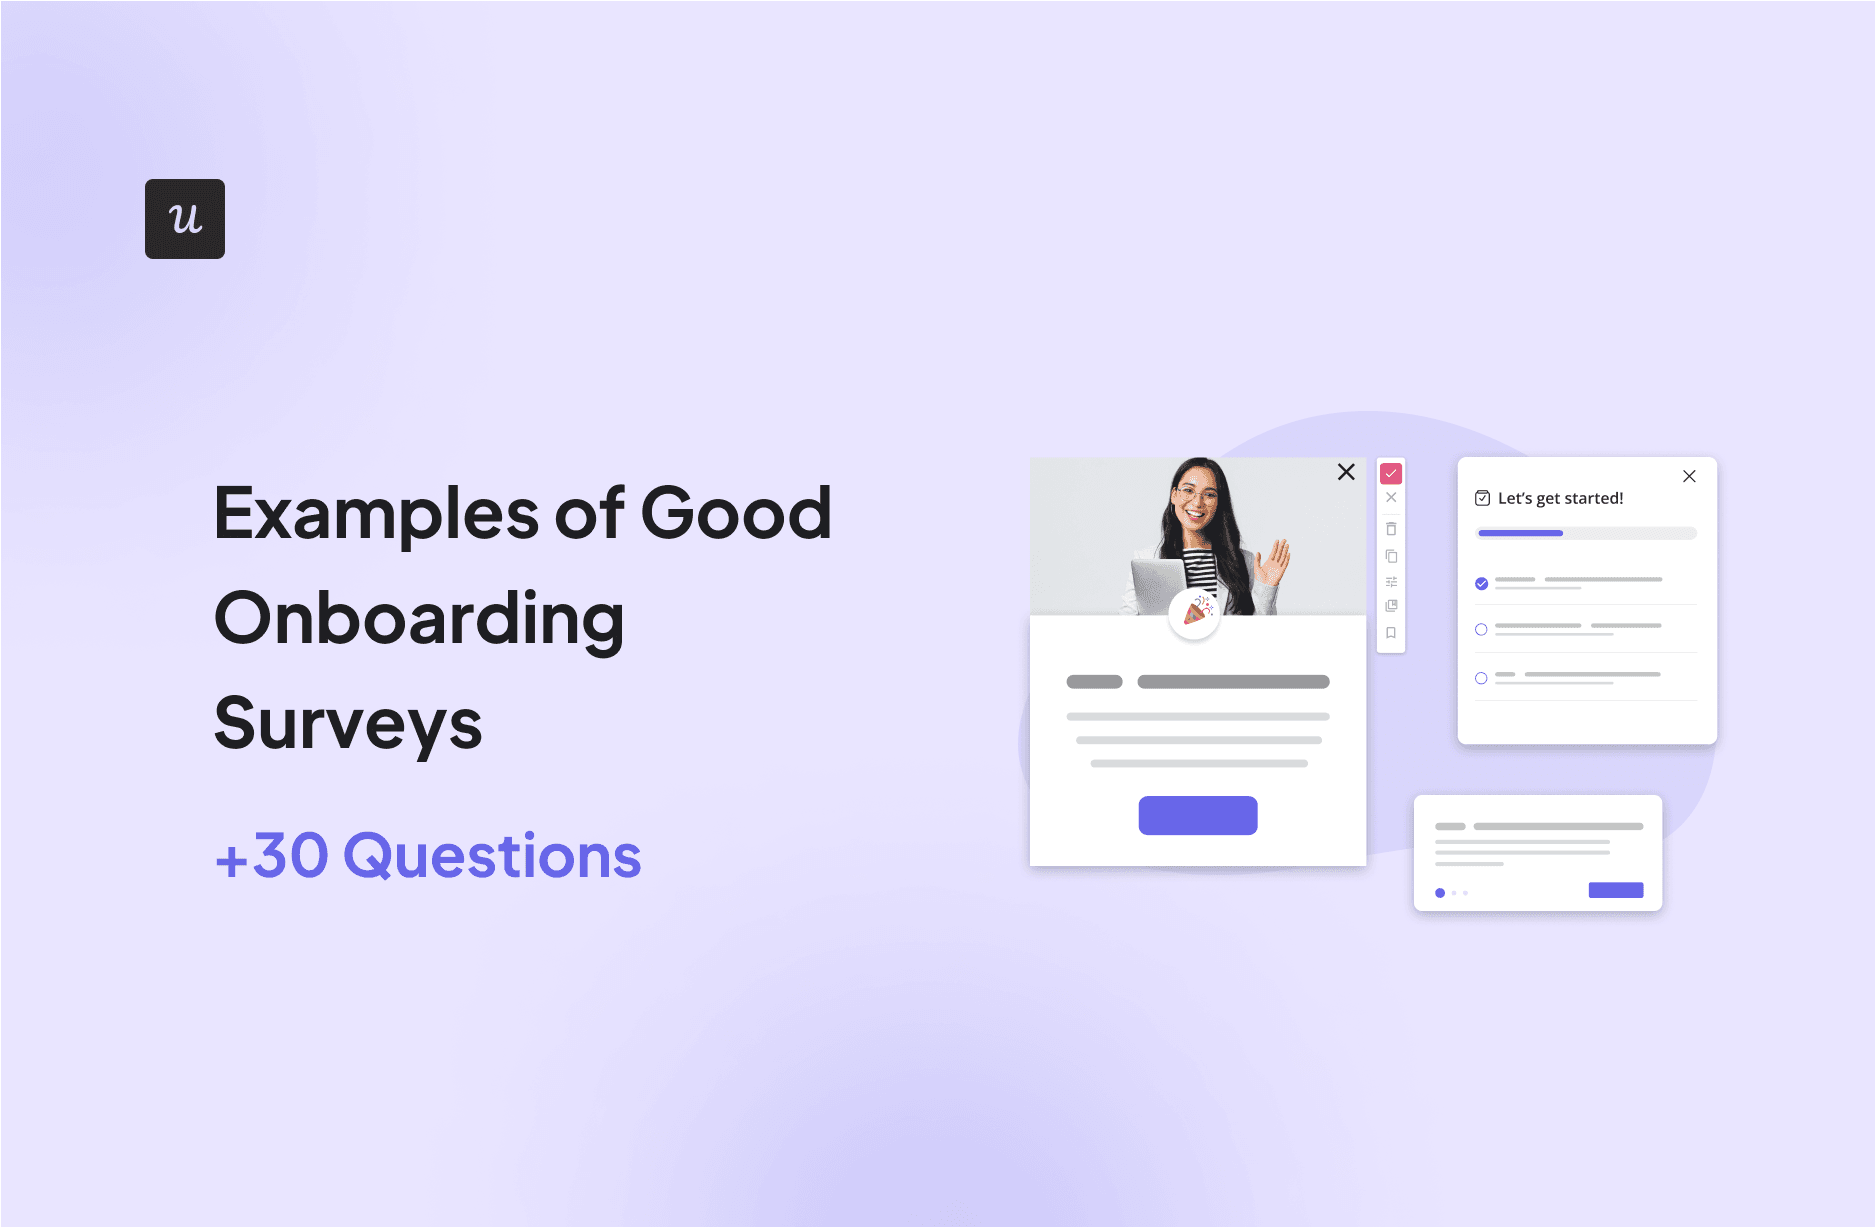 Examples of Good Onboarding Surveys [+30 Questions] cover